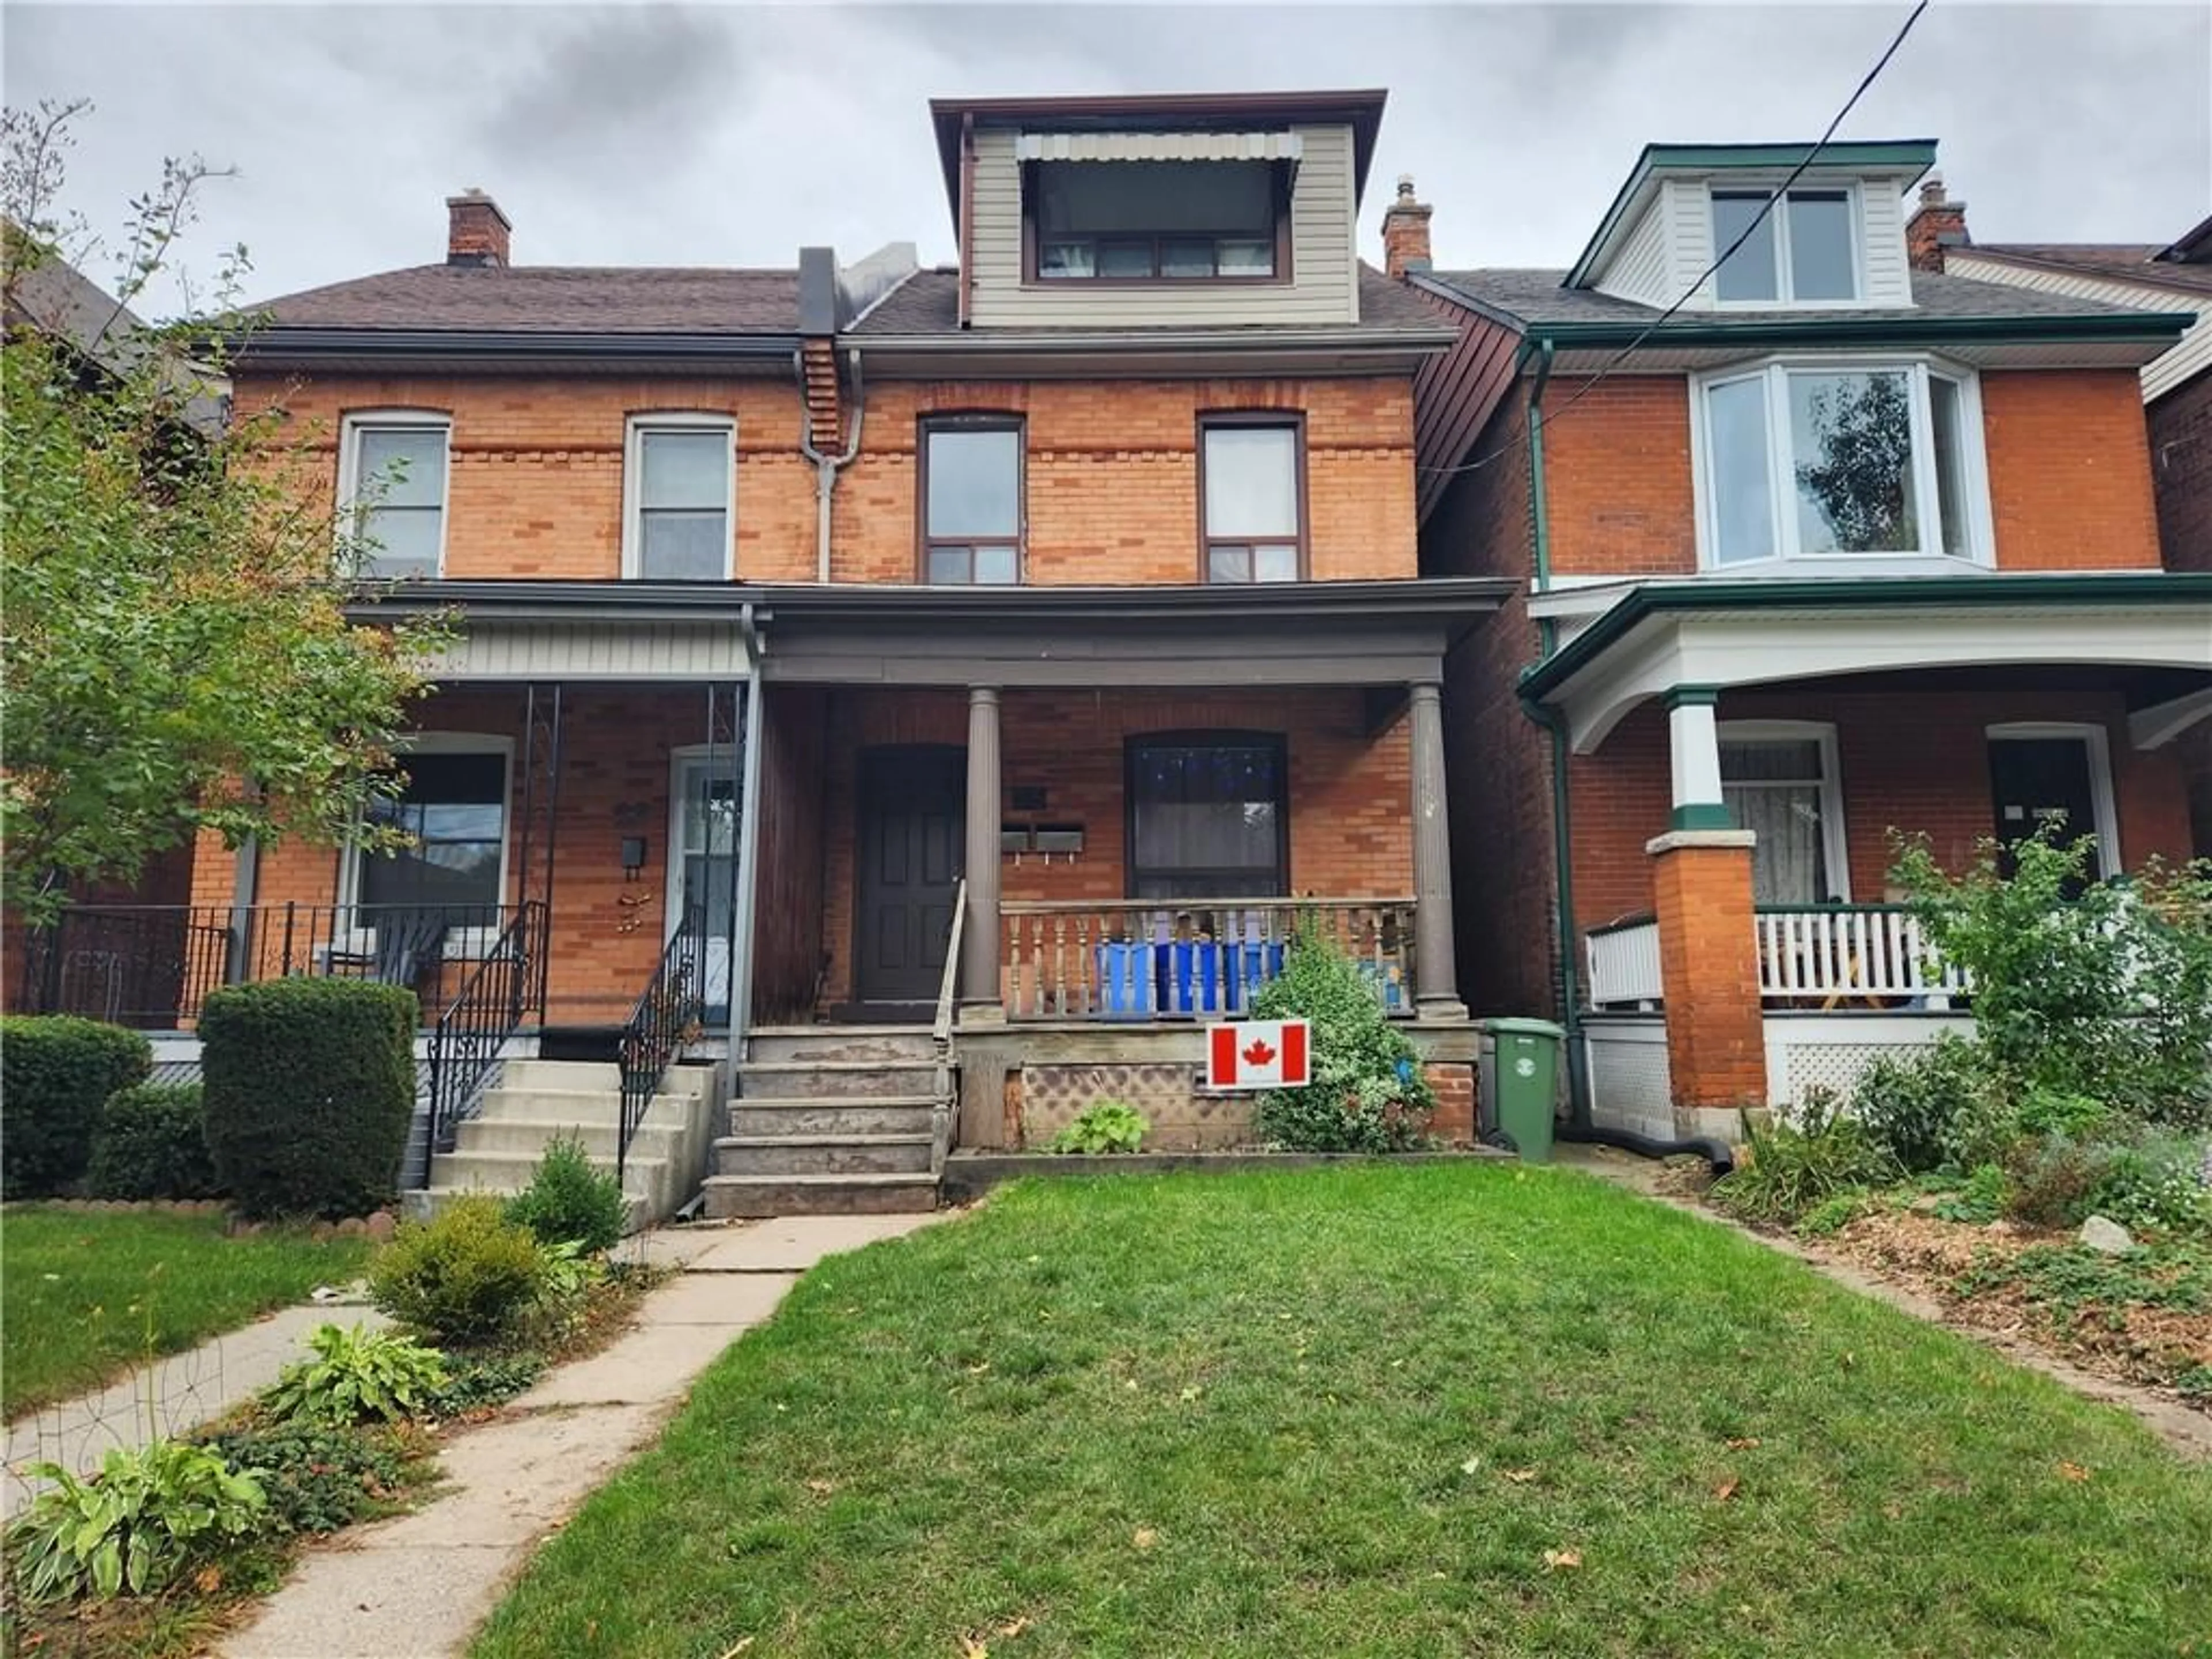 Home with brick exterior material for 25 GLADSTONE Ave, Hamilton Ontario L8M 2H7